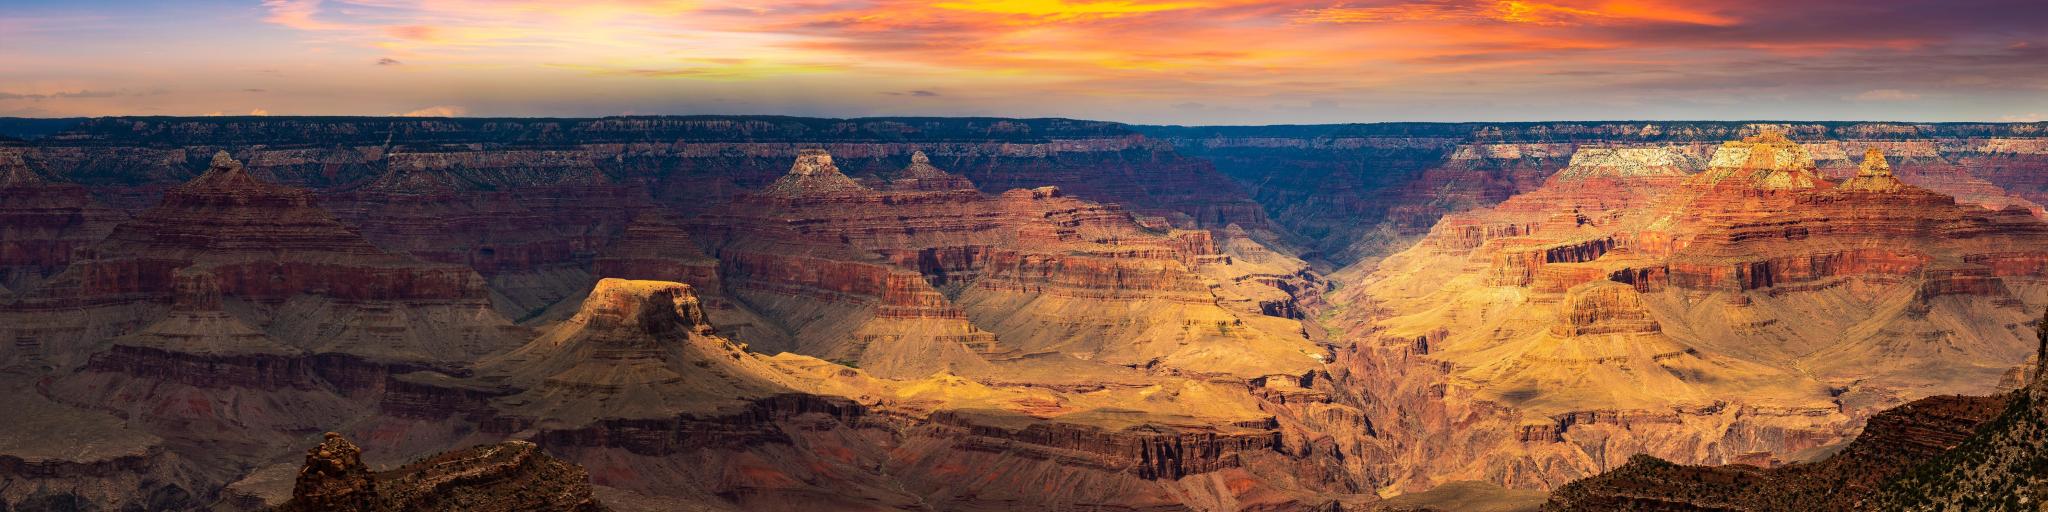 Grand Canyon National Park at sunset, Arizona, USA taken as a panorama with light shining on some of the canyons and a red dramatic sky.